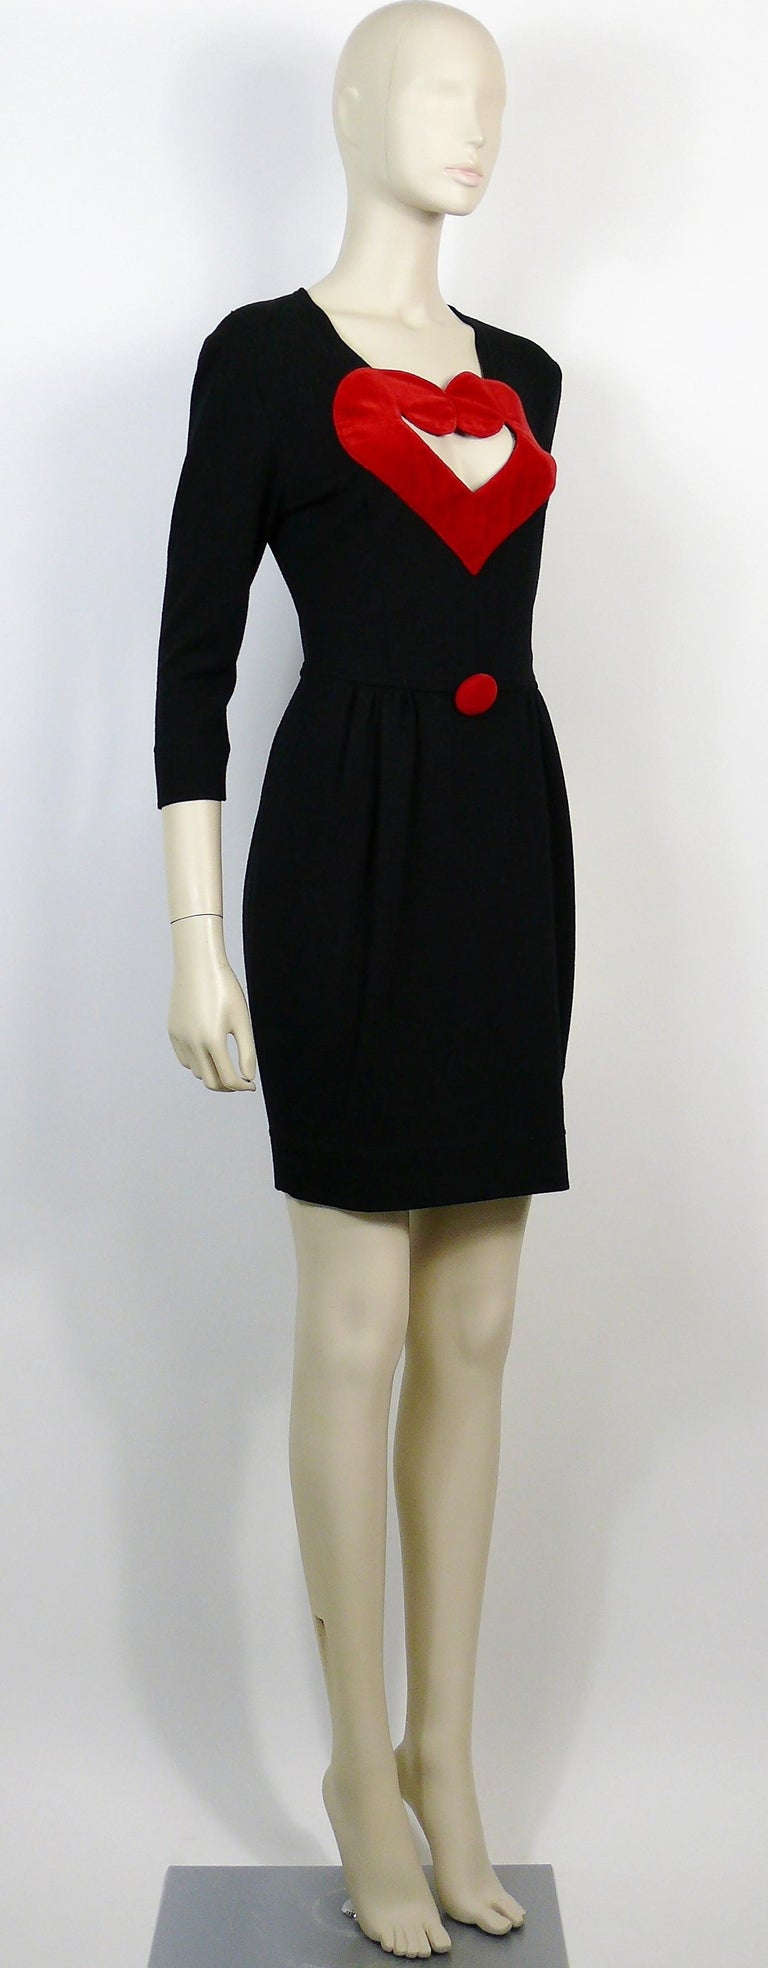 MOSCHINO vintage black dress featuring a large cut-out red velvet heart shaped breast.

This dress features :
- Black wool blend fabric.
- Large cut-out red velvet heart shaped breast with matching oversized button.
- Hidden back zipper closure.
-